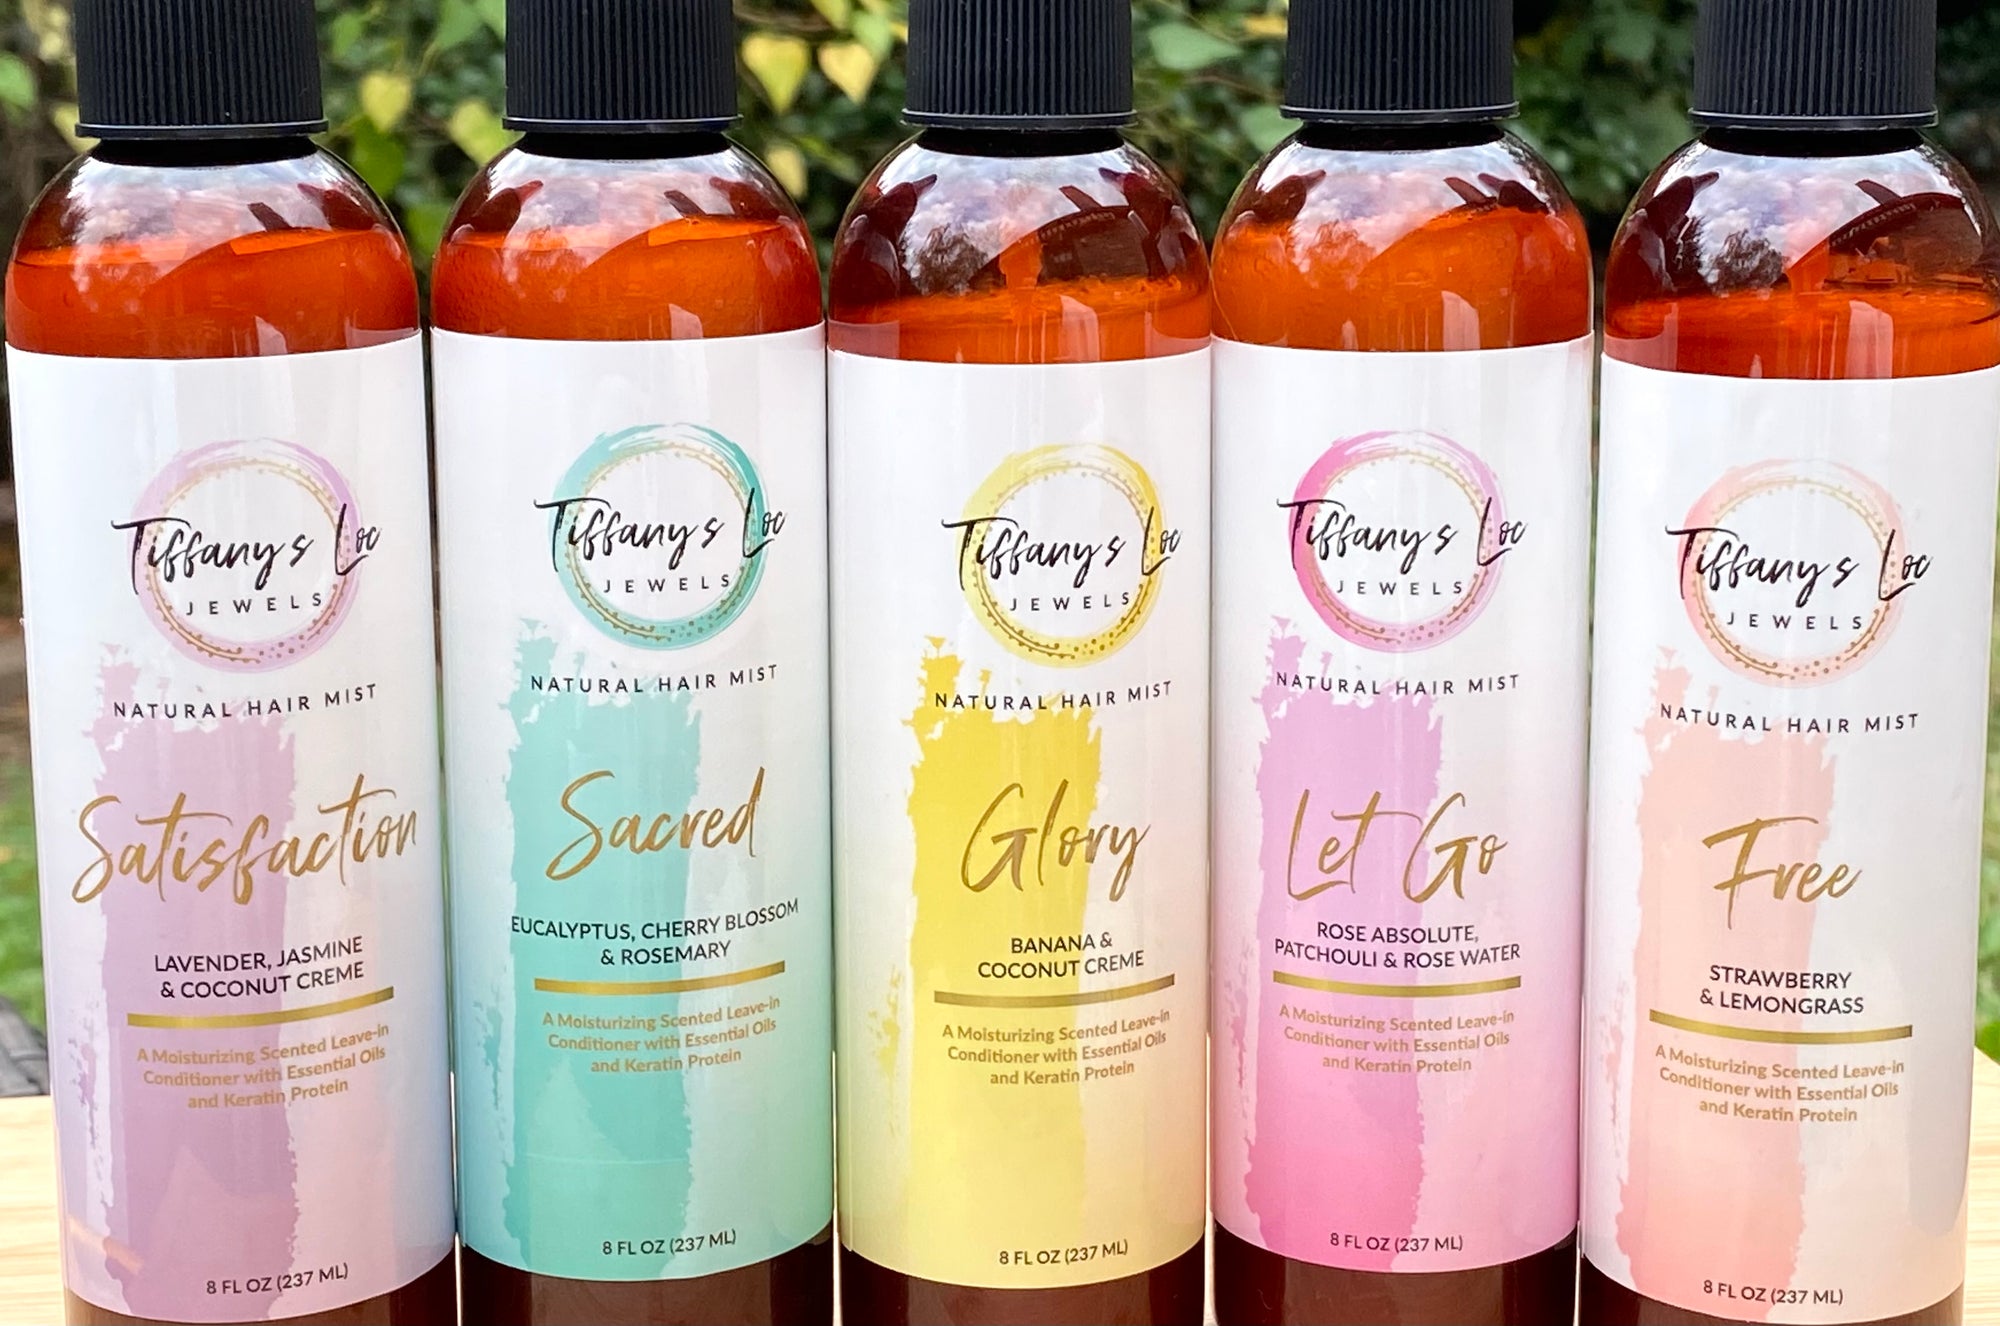 NATURAL HAIR MISTS